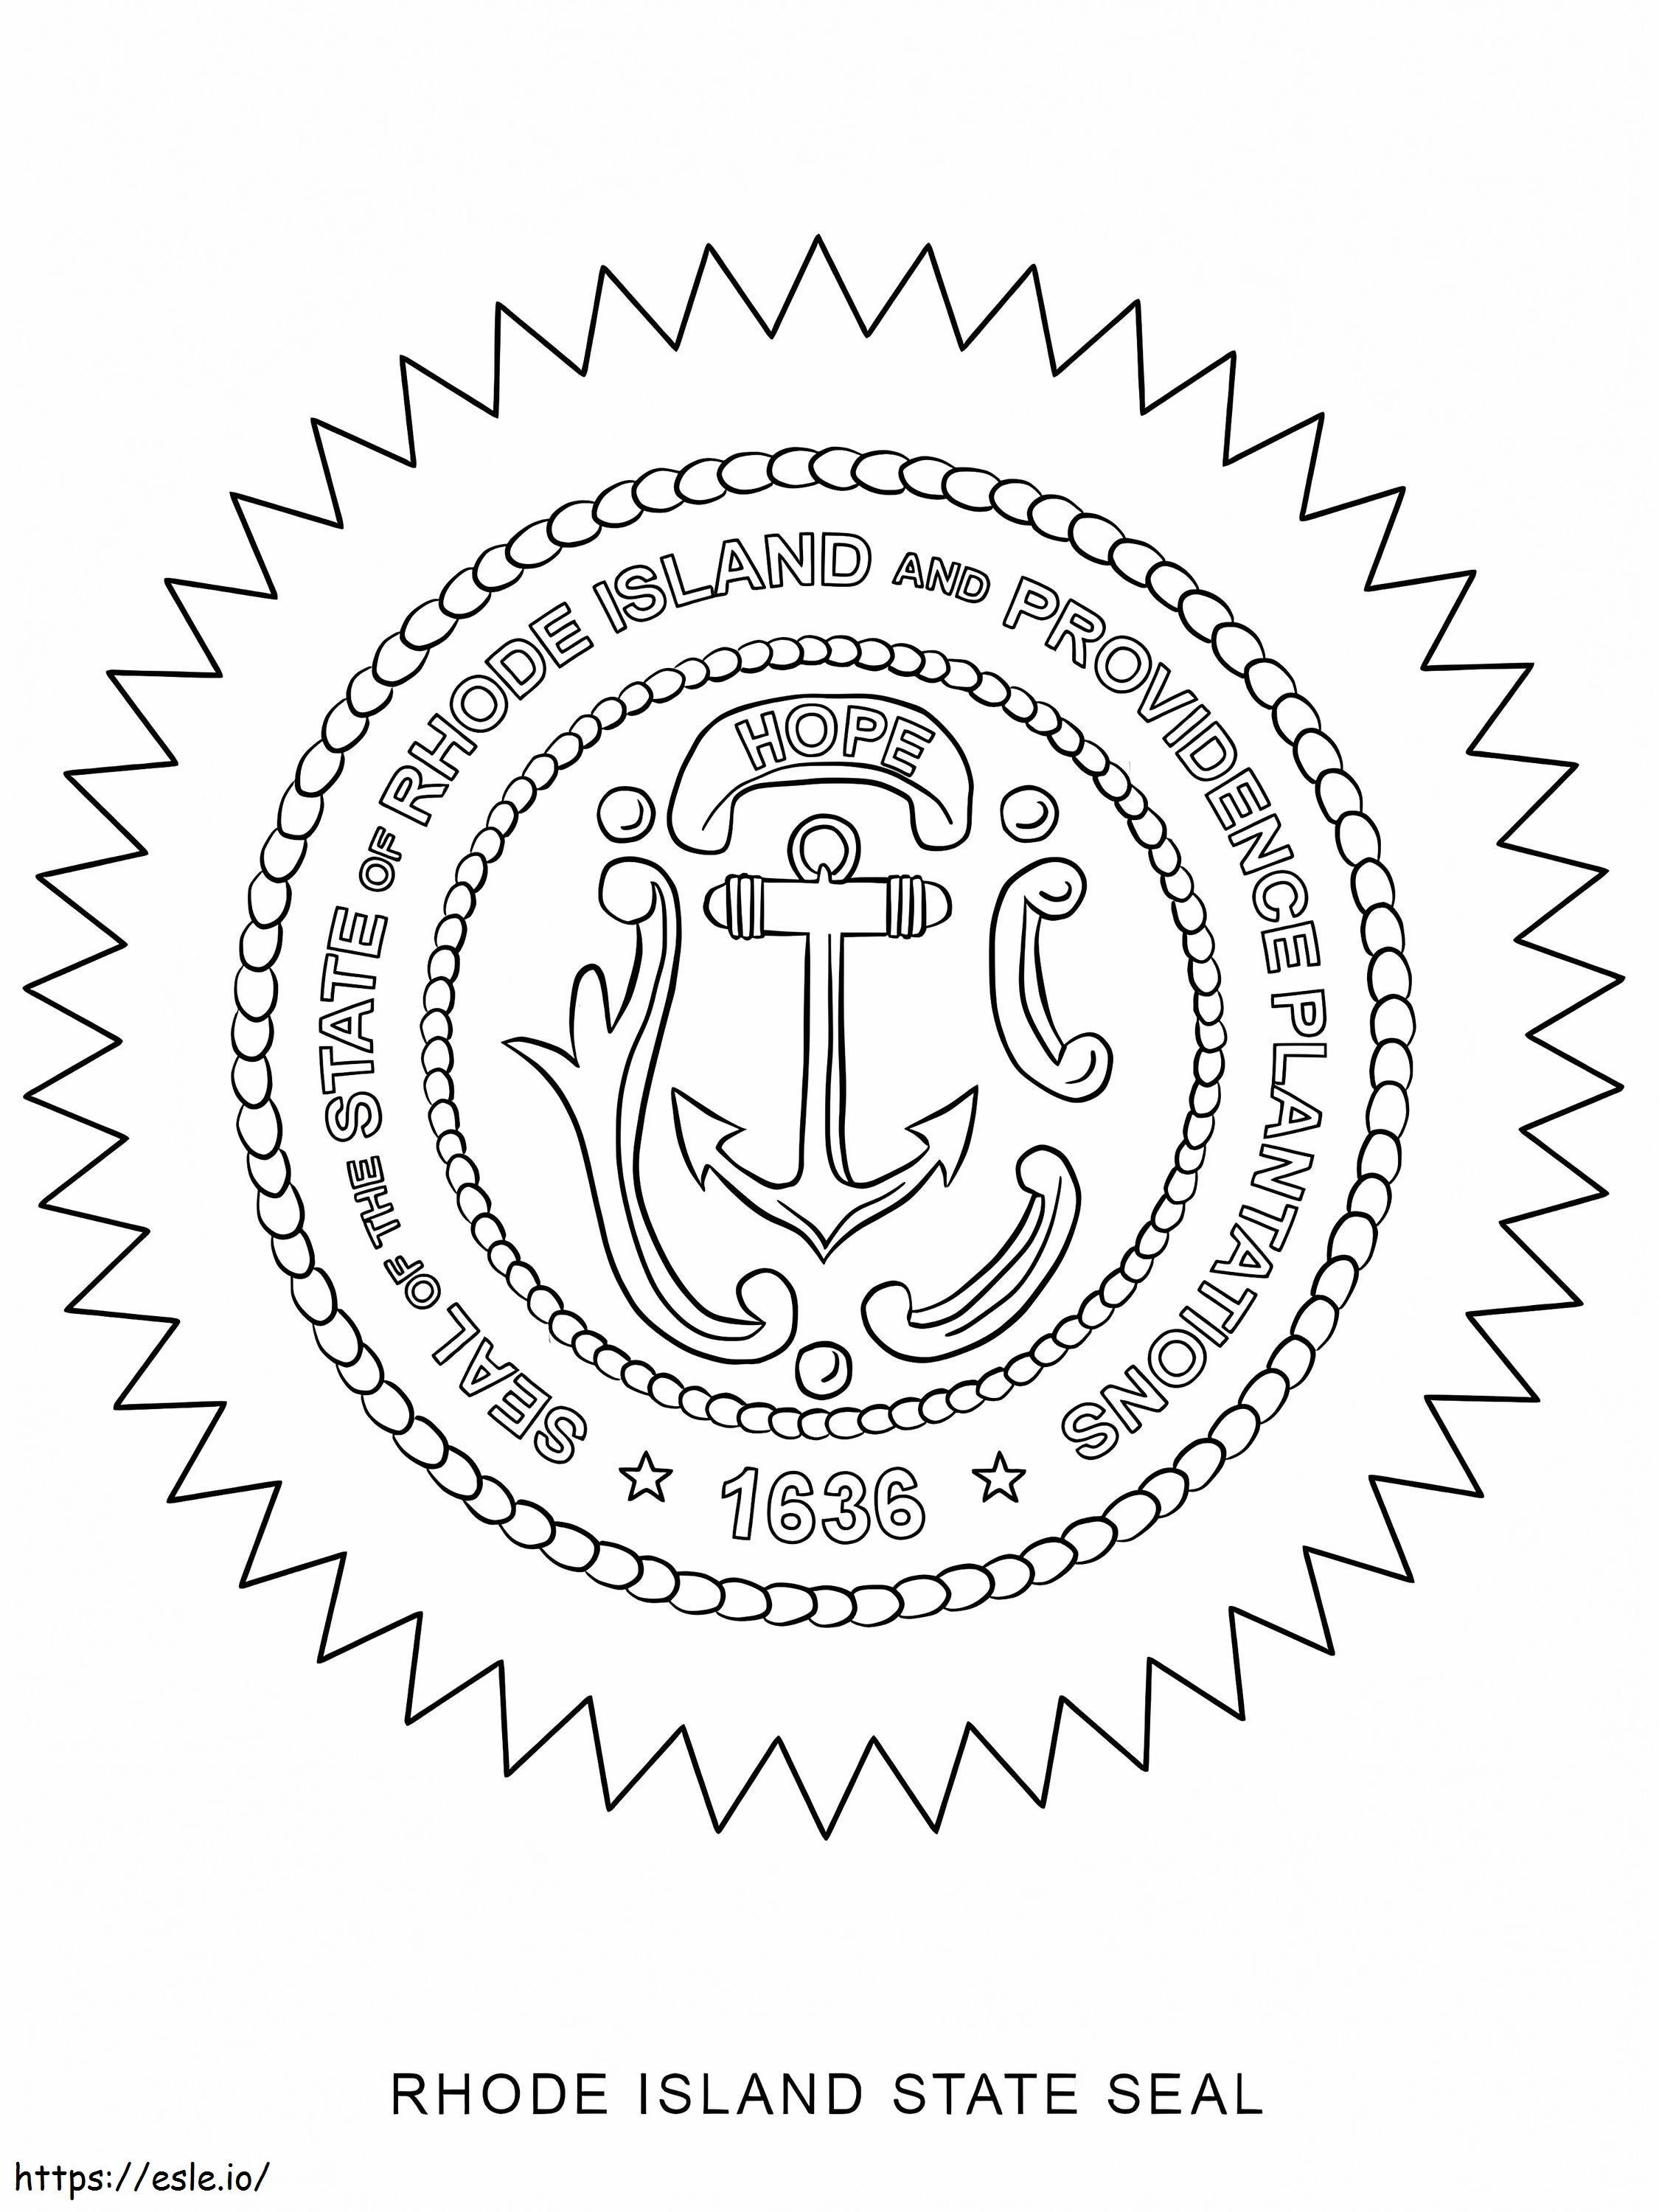 Rhode Island State Seal coloring page